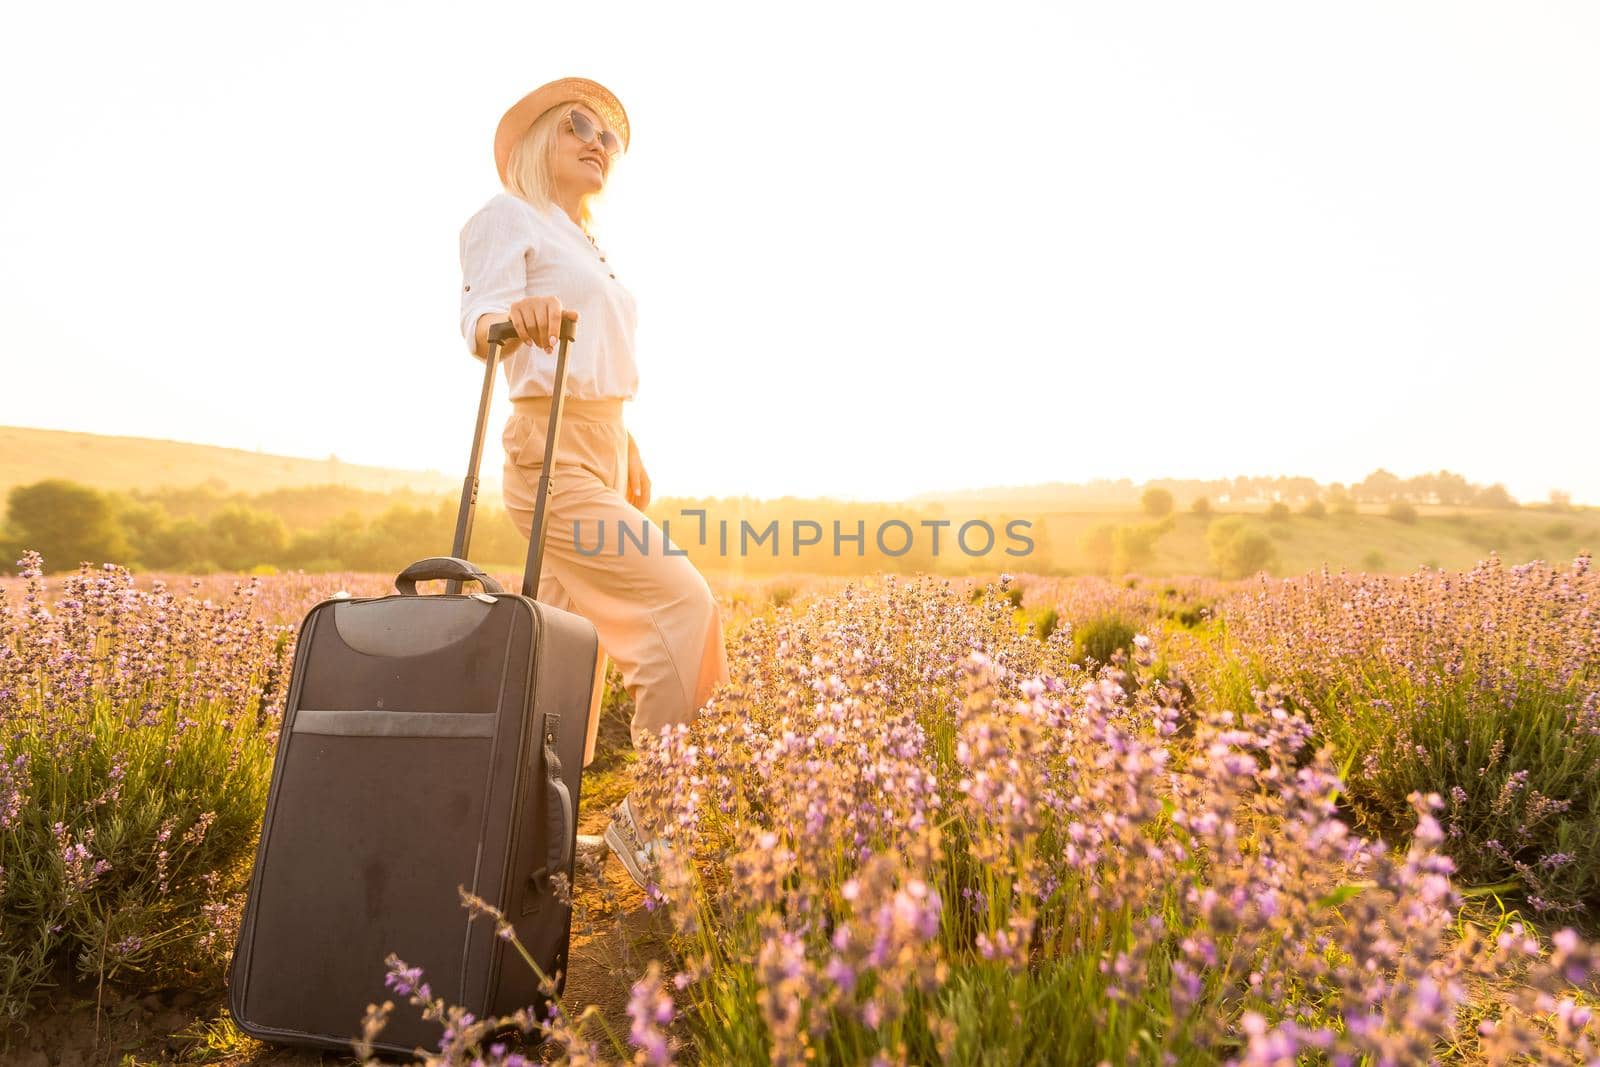 Full length portrait of pretty young lady, wearing light dress, straw hat, walking with bag in summer flowering lavender field, enjoying scent of lavender by Andelov13